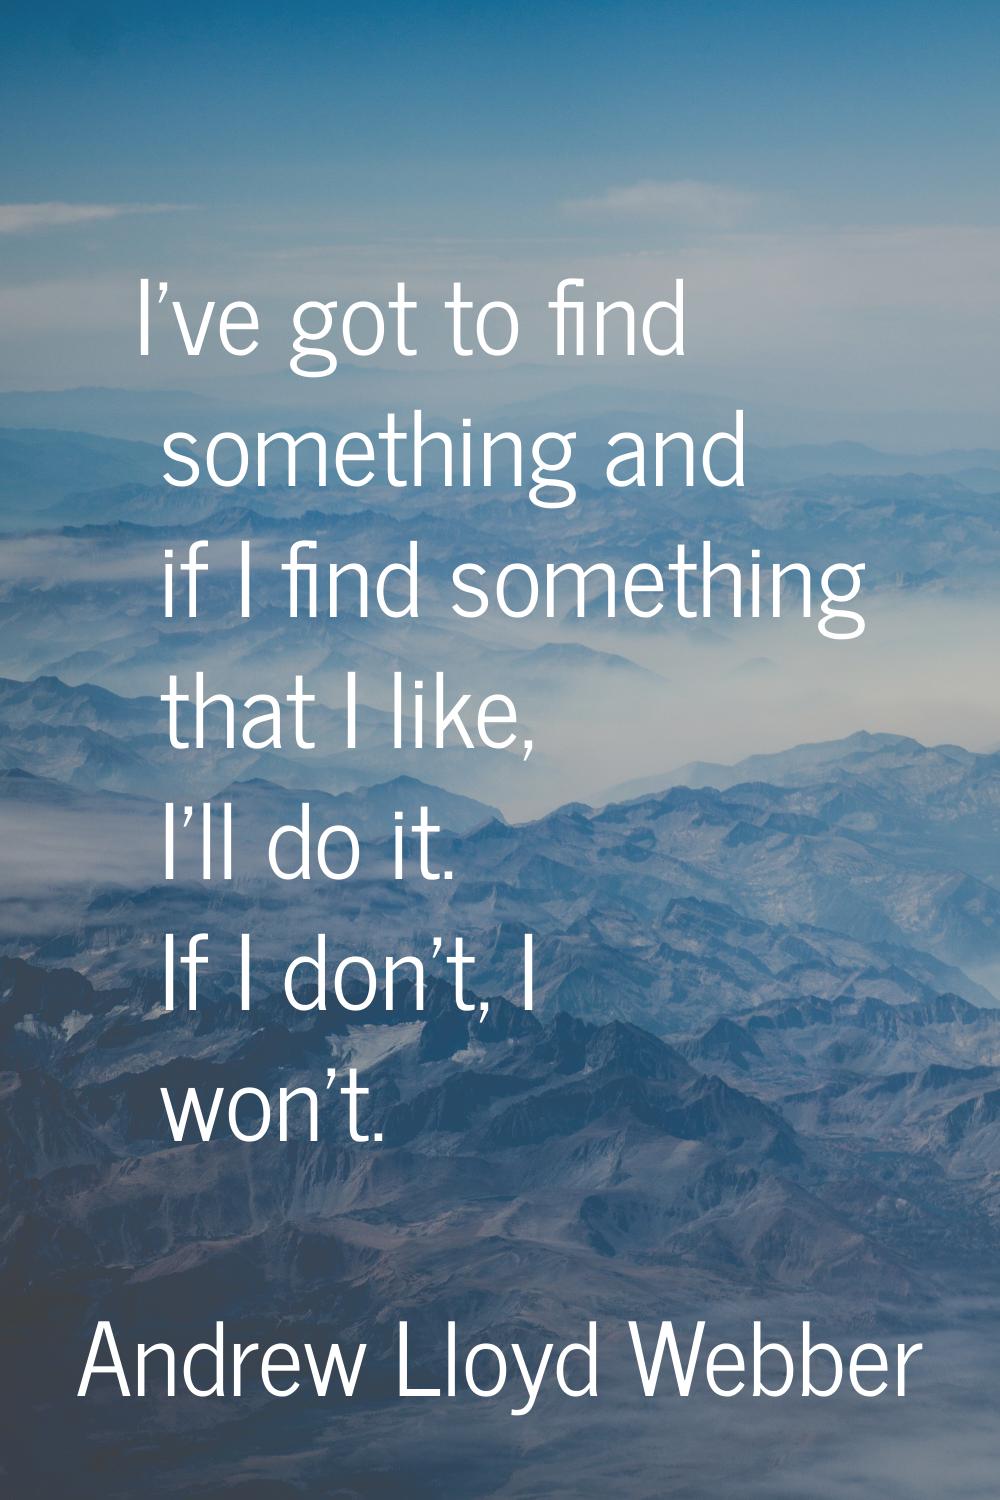 I've got to find something and if I find something that I like, I'll do it. If I don't, I won't.